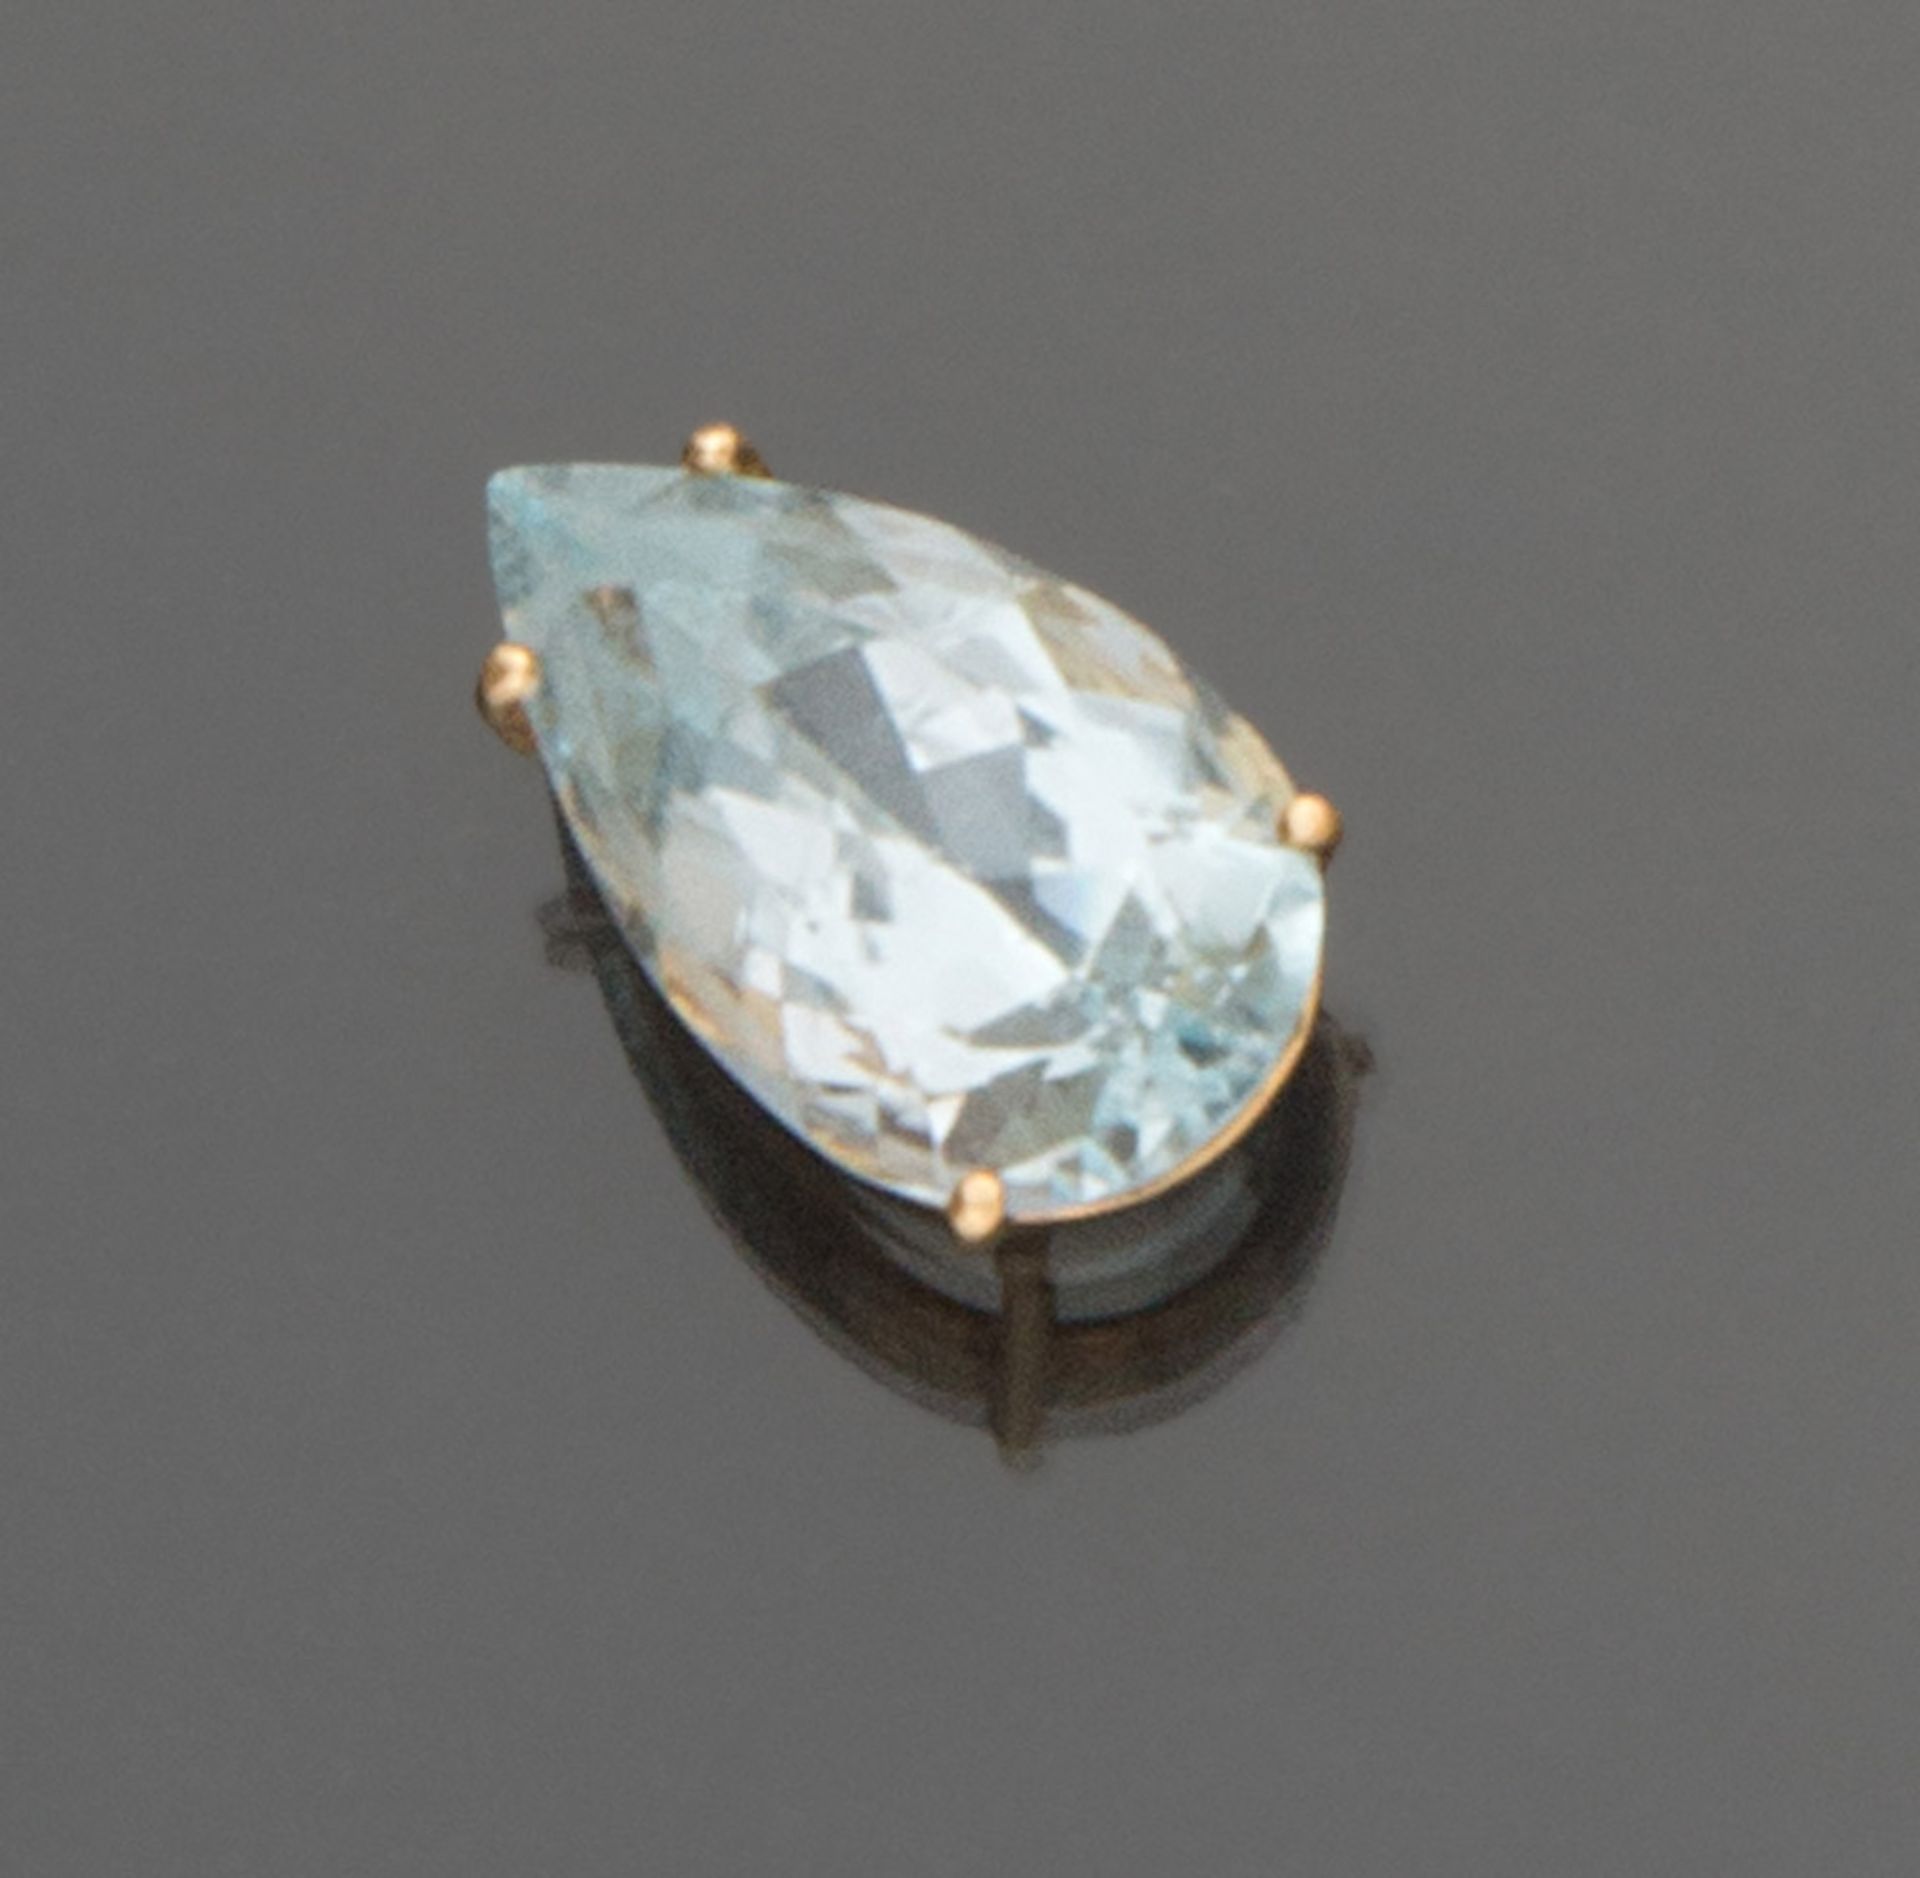 PENDANT a drop of aquamarine, with yellow gold frame 18 kt. Length cm. 2, total weight gr. 4.40.